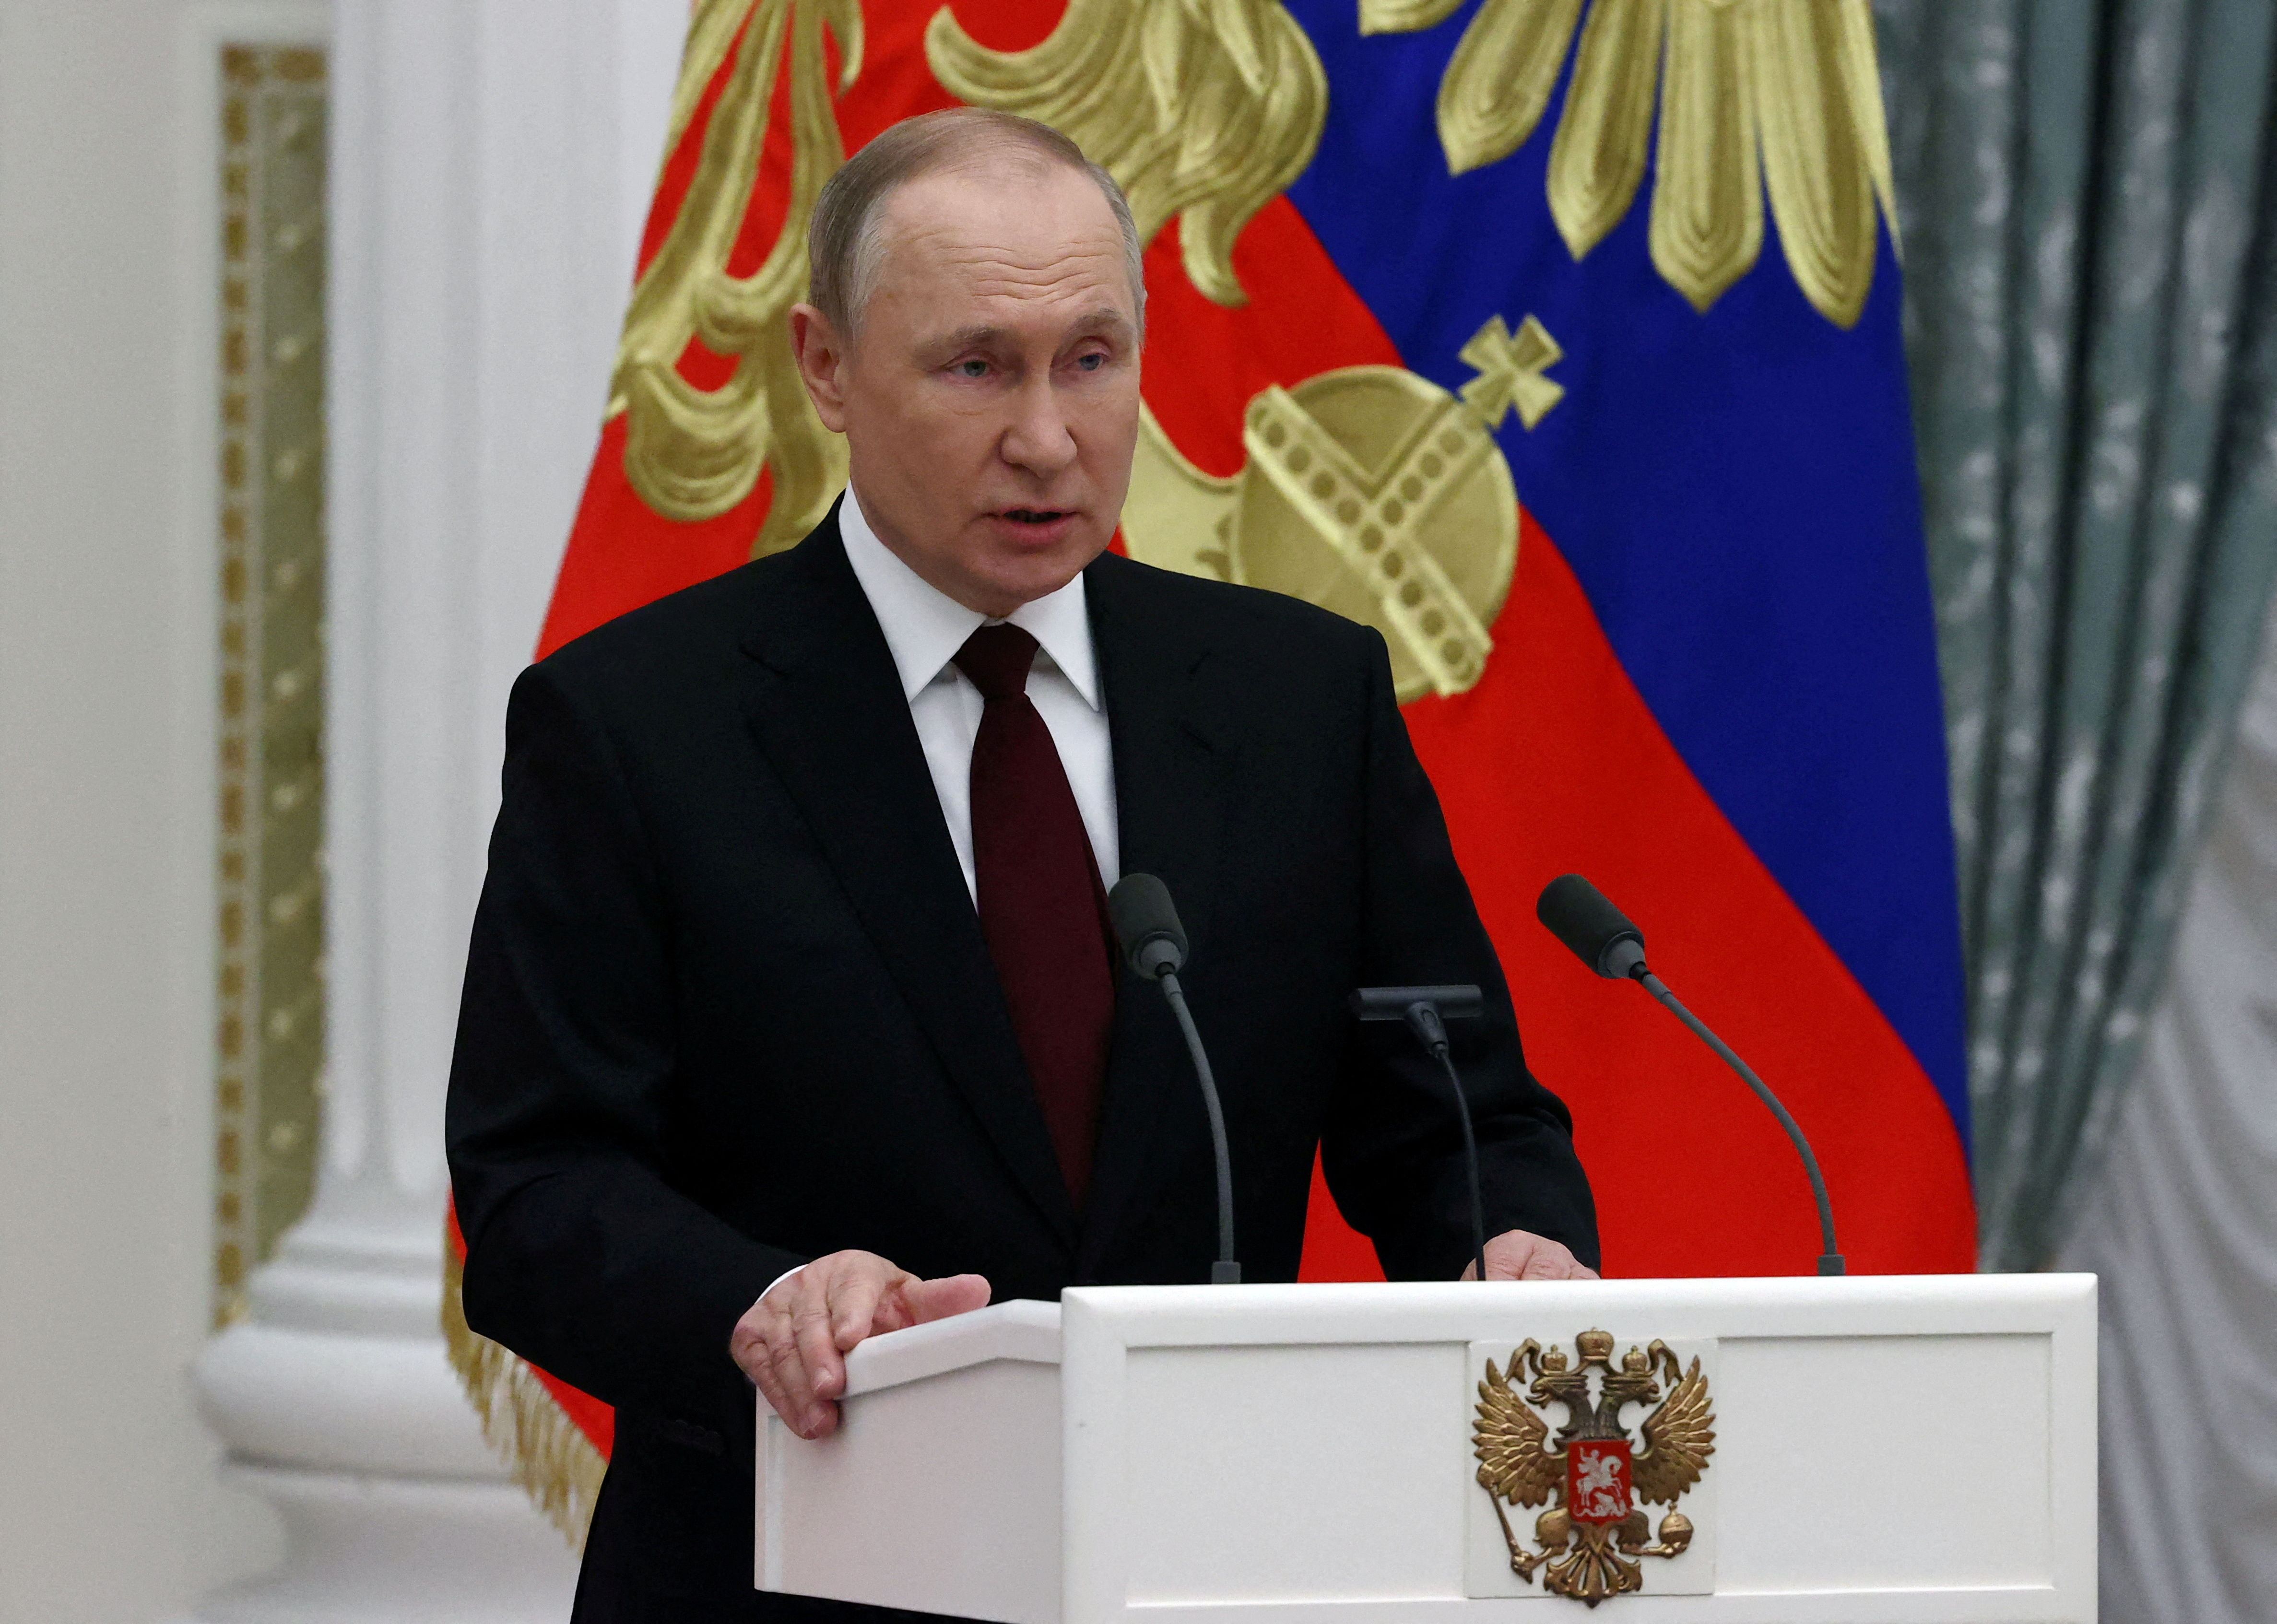 Russian President Vladimir Putin speaks during a ceremony to present the highest state awards at the Kremlin in Moscow, Russia February 2, 2022. Sputnik/Sergey Karpuhin/Pool via REUTERS 